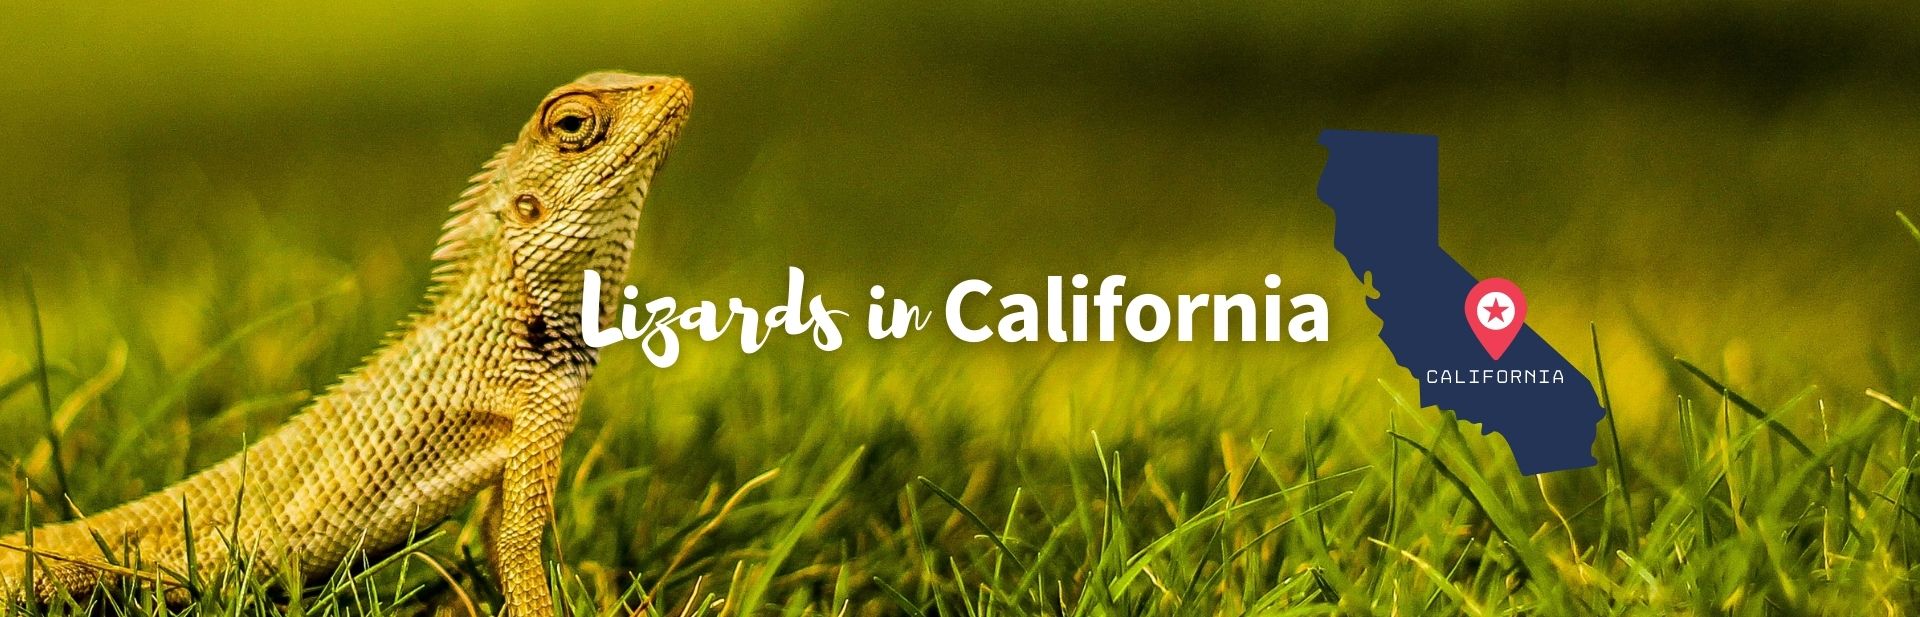 36 Species of Lizards in California: ID Guide, Chart & Pictures